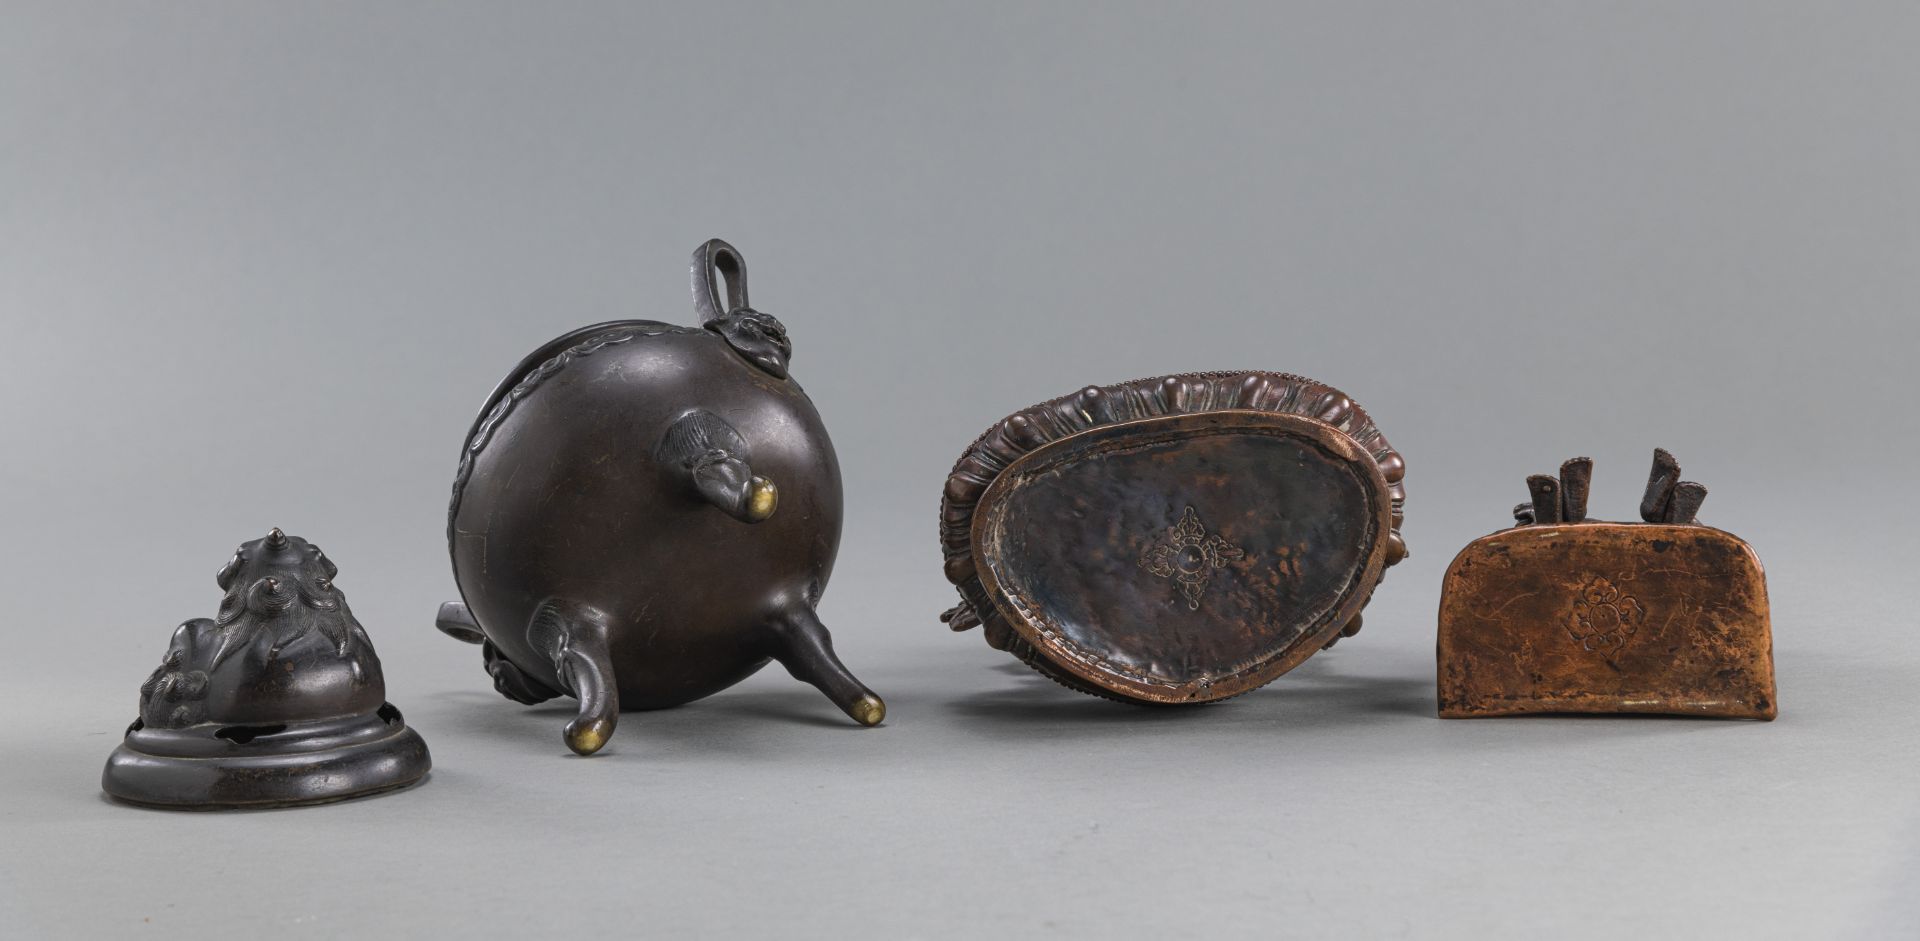 A BRONZE FIGURE OF TARA, A BRONZE FIGURE OF TARA AND A TRIPOD BRONZE CENSER WITH COVER - Image 3 of 3